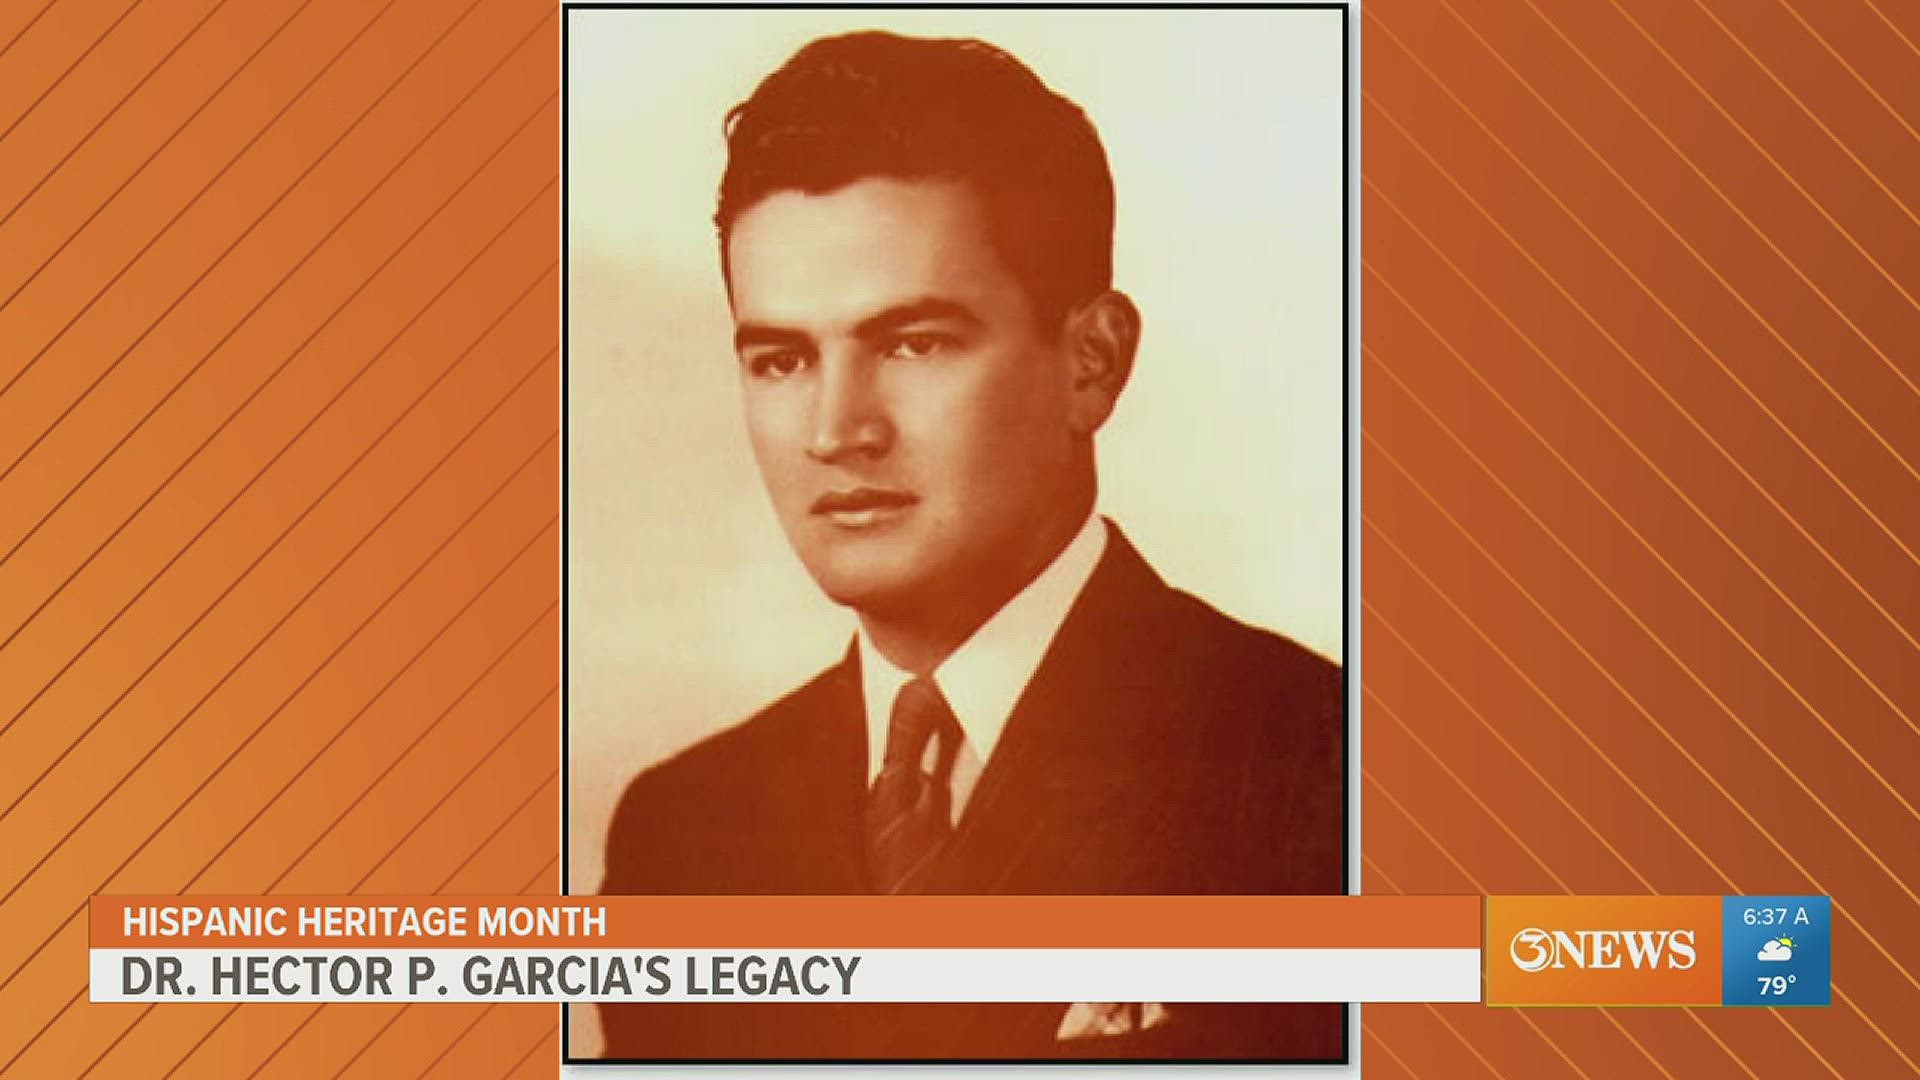 Cecilia Garcia-Akers, daughter of Hispanic leader Dr. Hector P. Garcia, joined 3NEWS to talk about events that celebrate the life and accomplishments of her father.